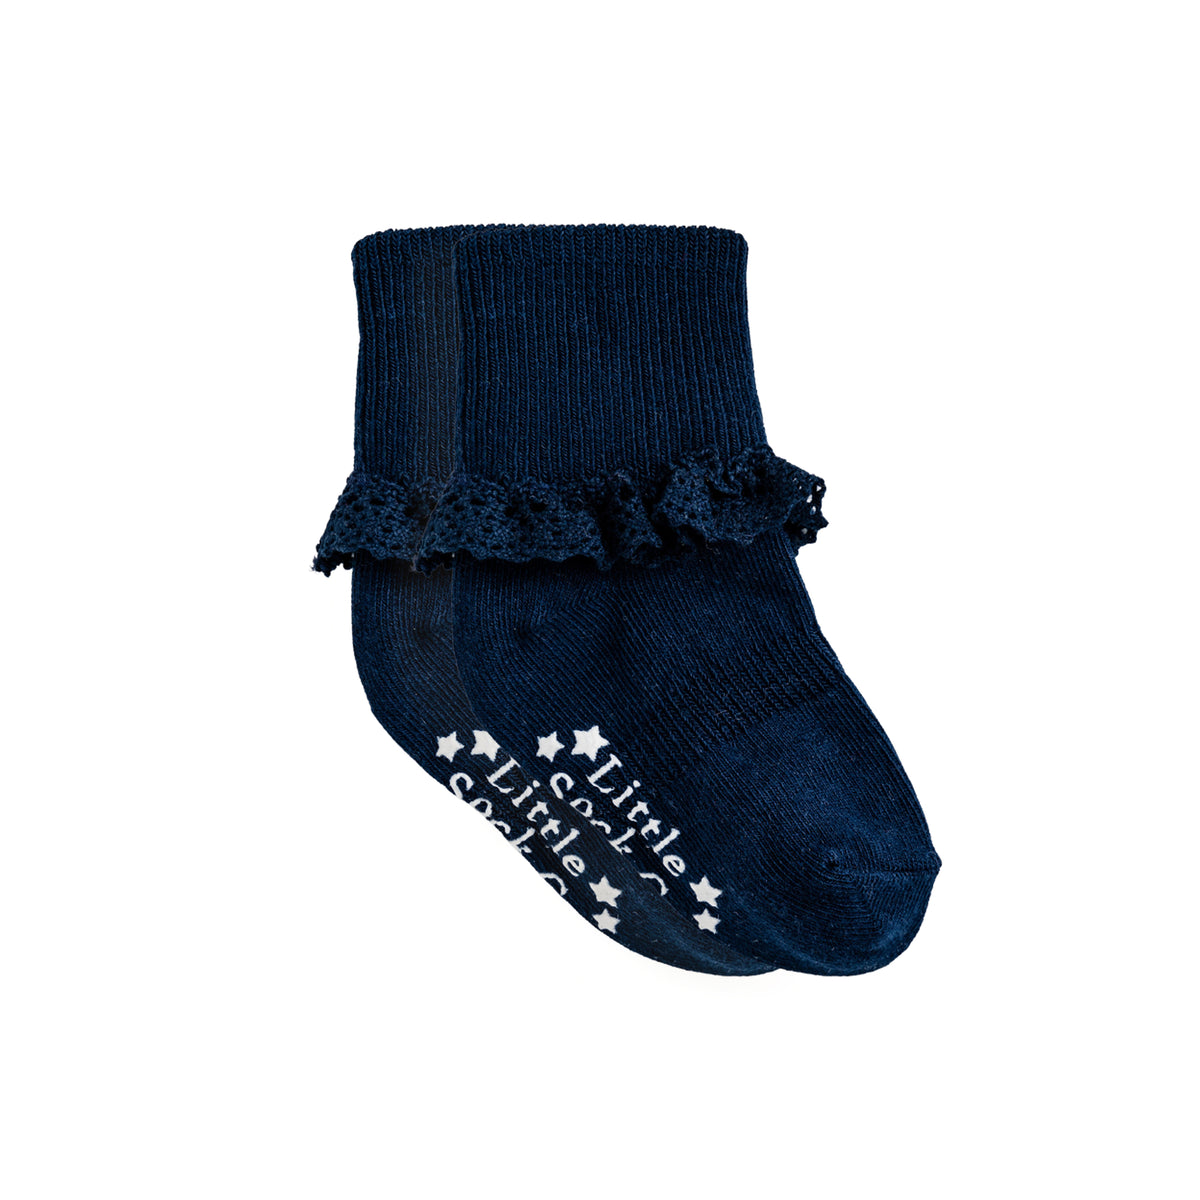 Frilly Non-Slip Stay-On Baby and Toddler Socks - Plain Navy